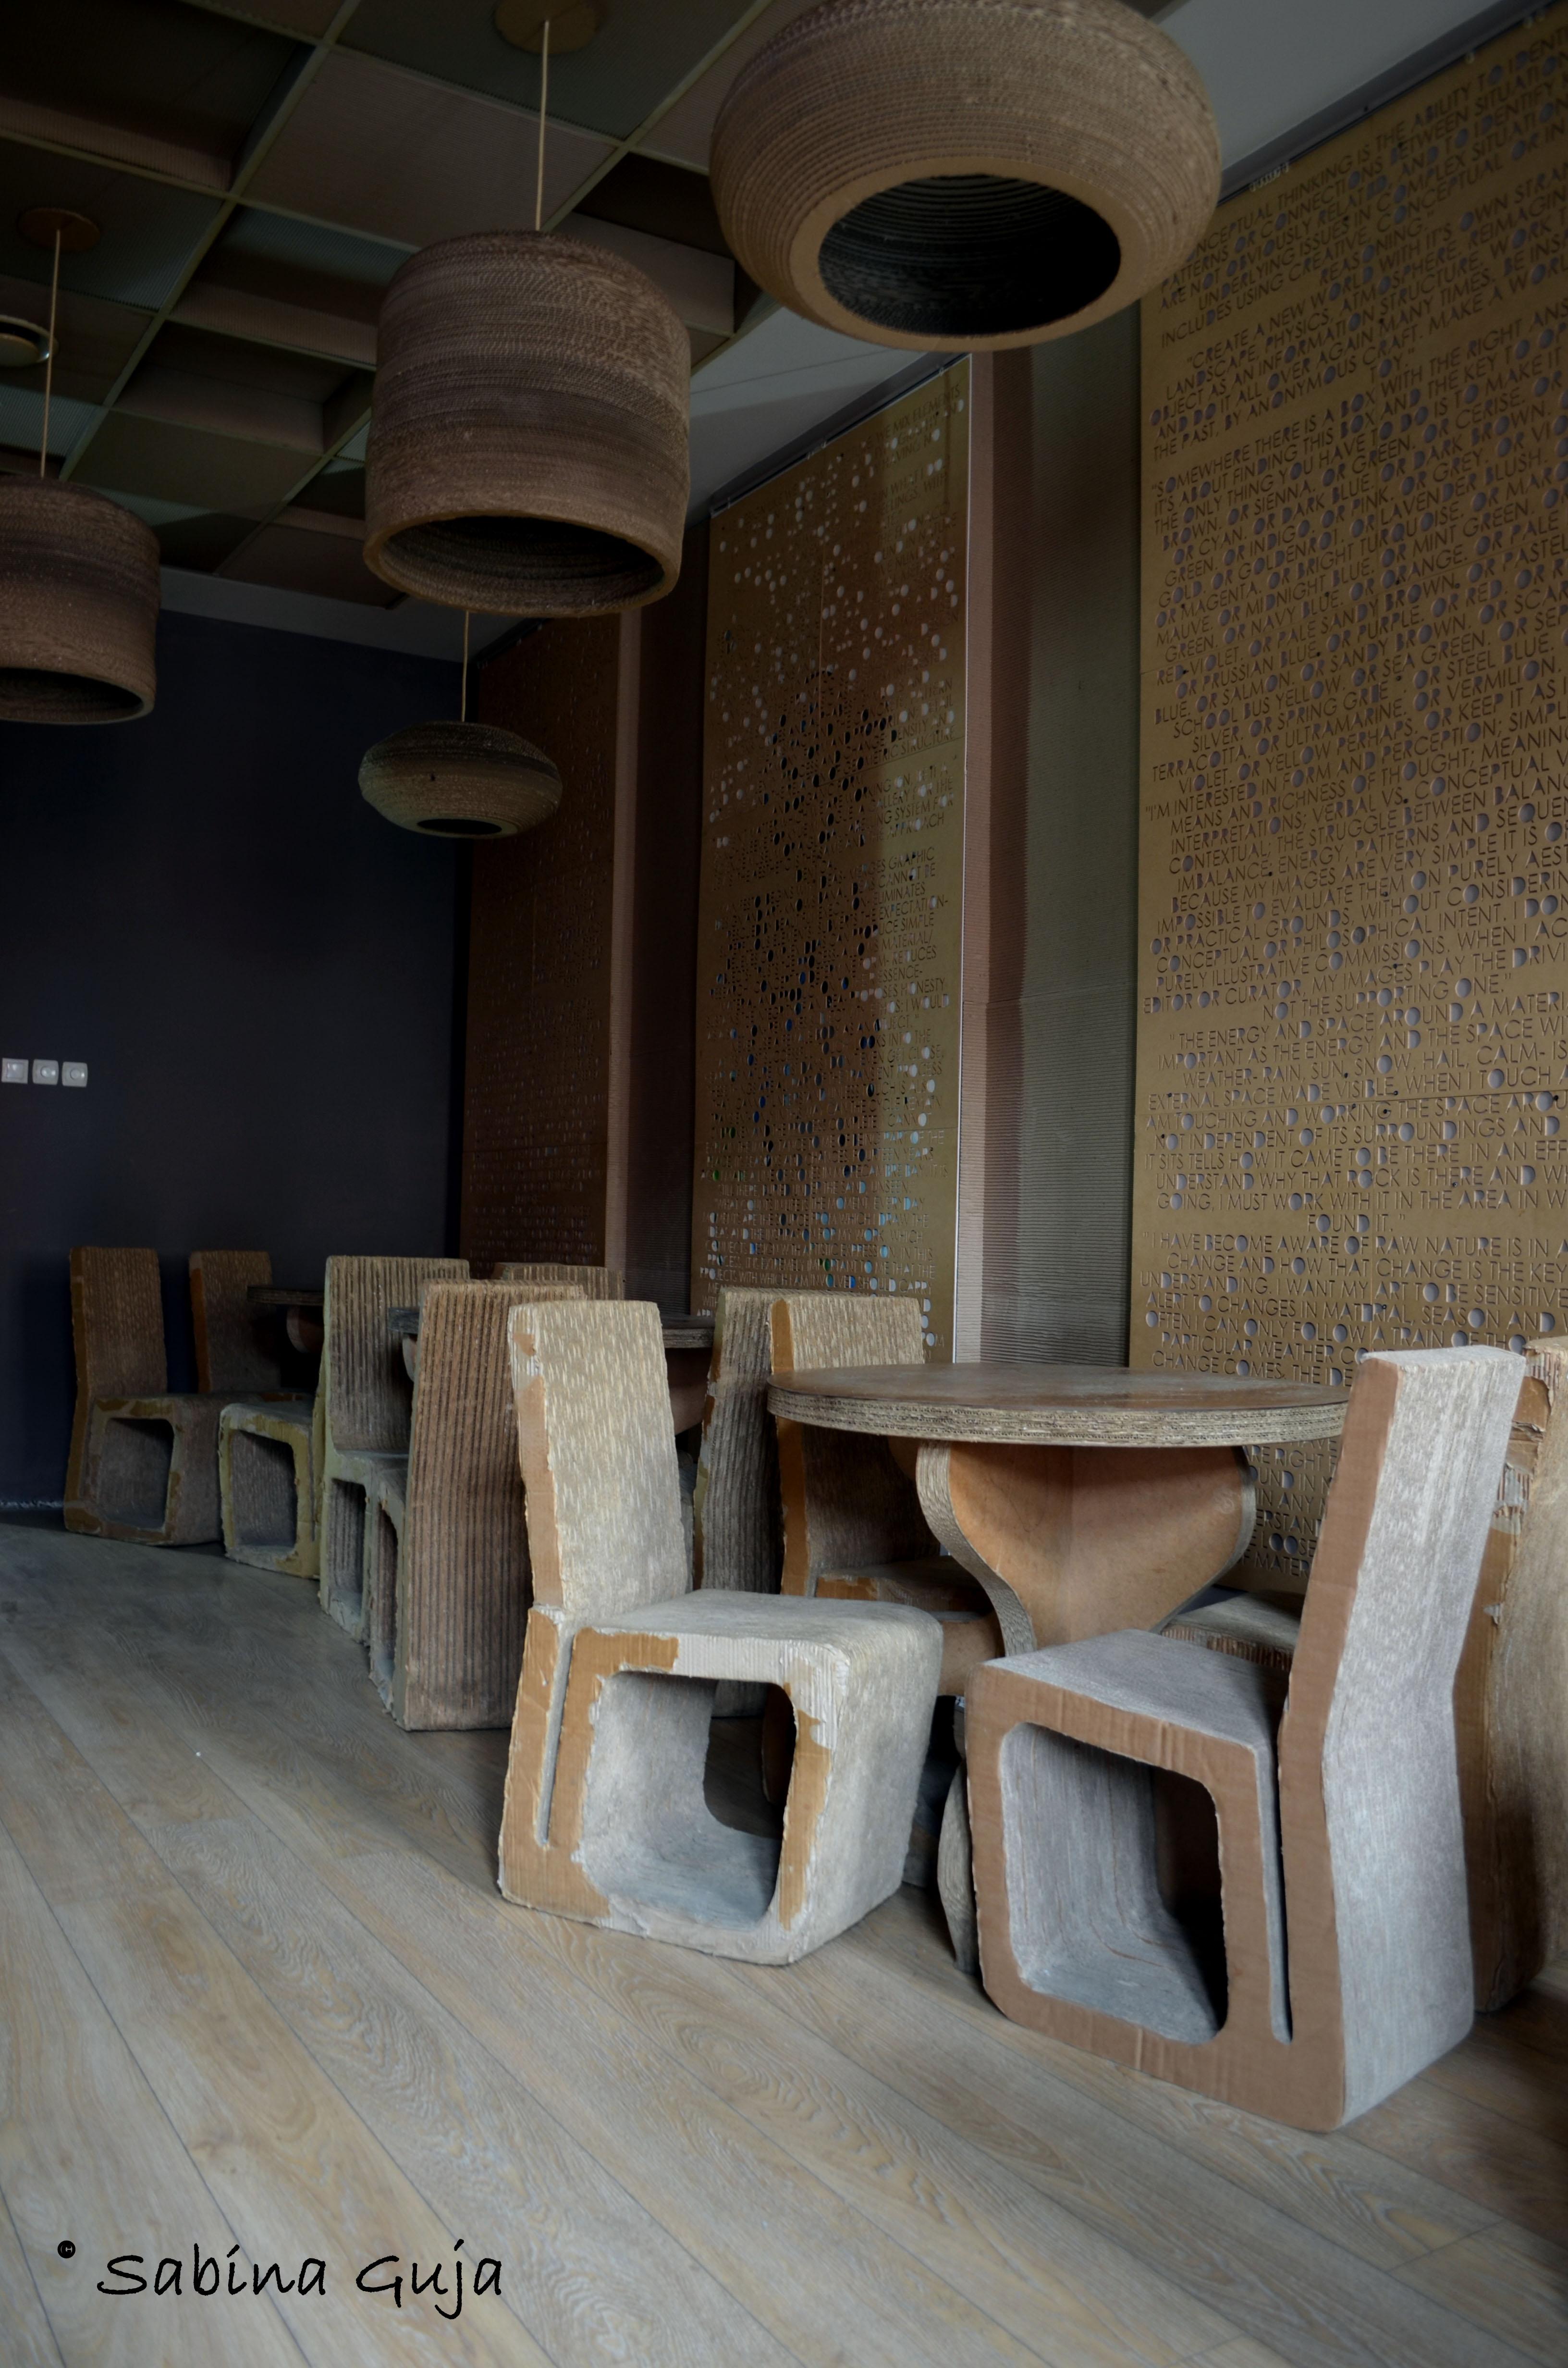 Cover image of this place L'atelier Cafe